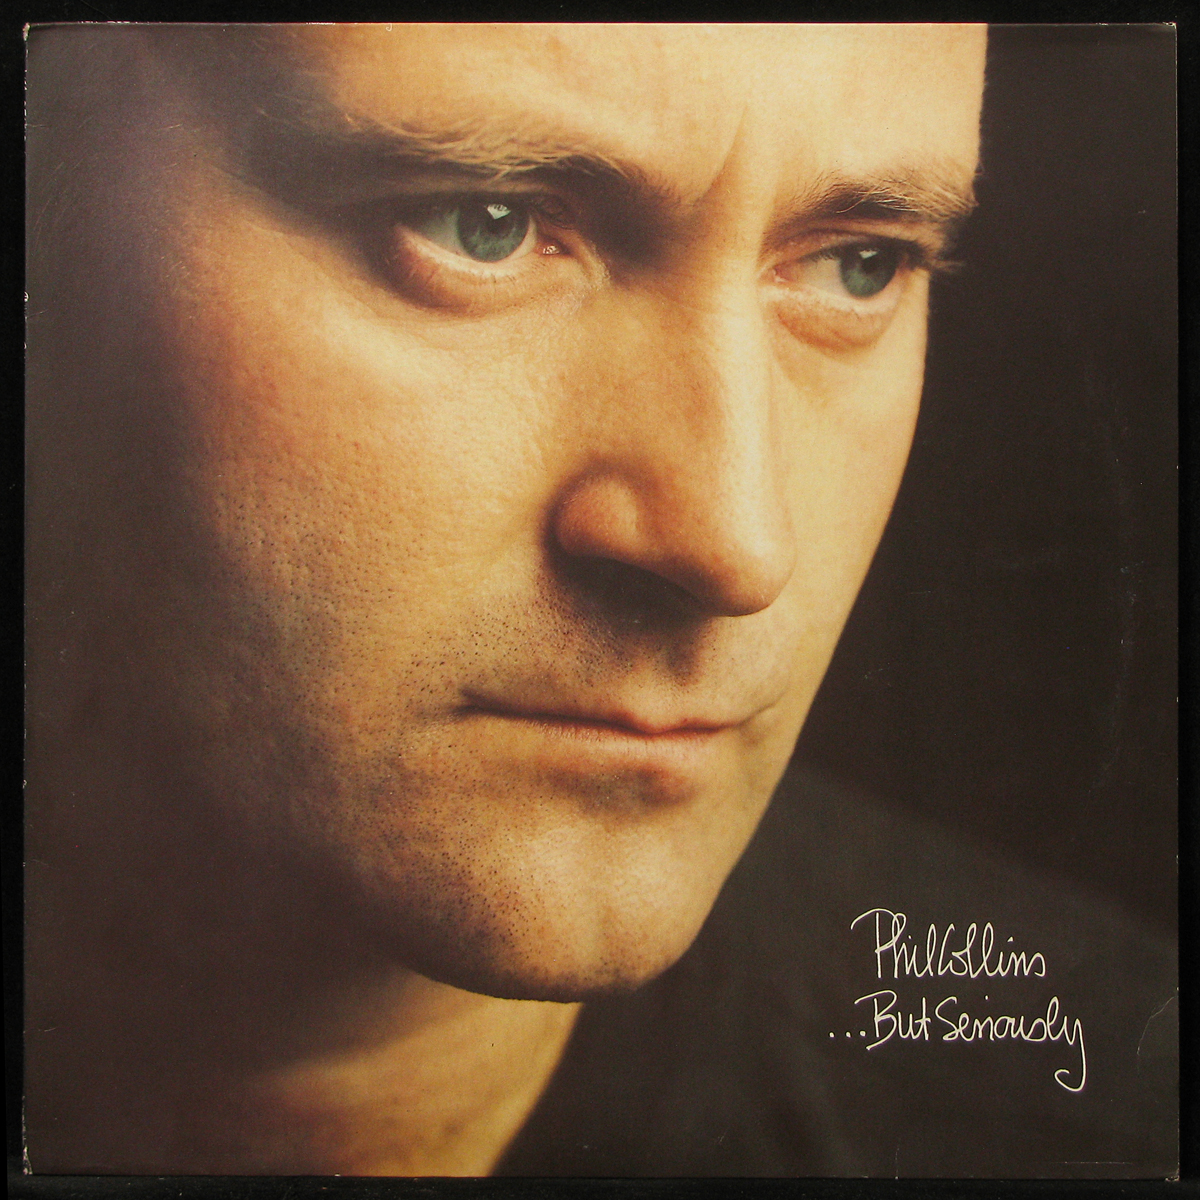 LP Phil Collins — But Seriously фото